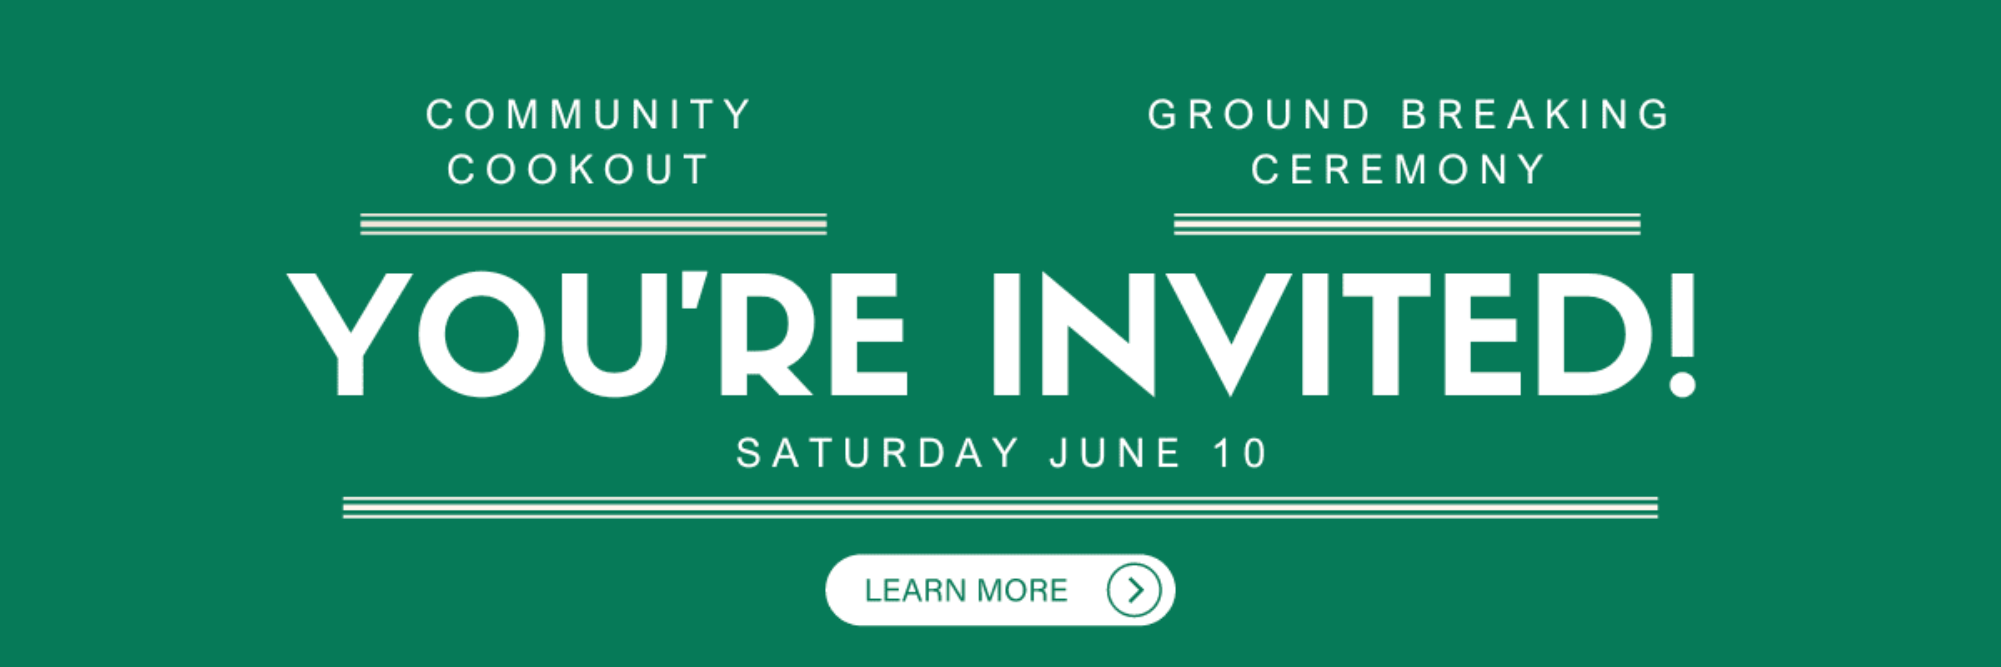 You're Invited! Community Cookout. Ground Breaking Ceremony. Saturday, June 10th.